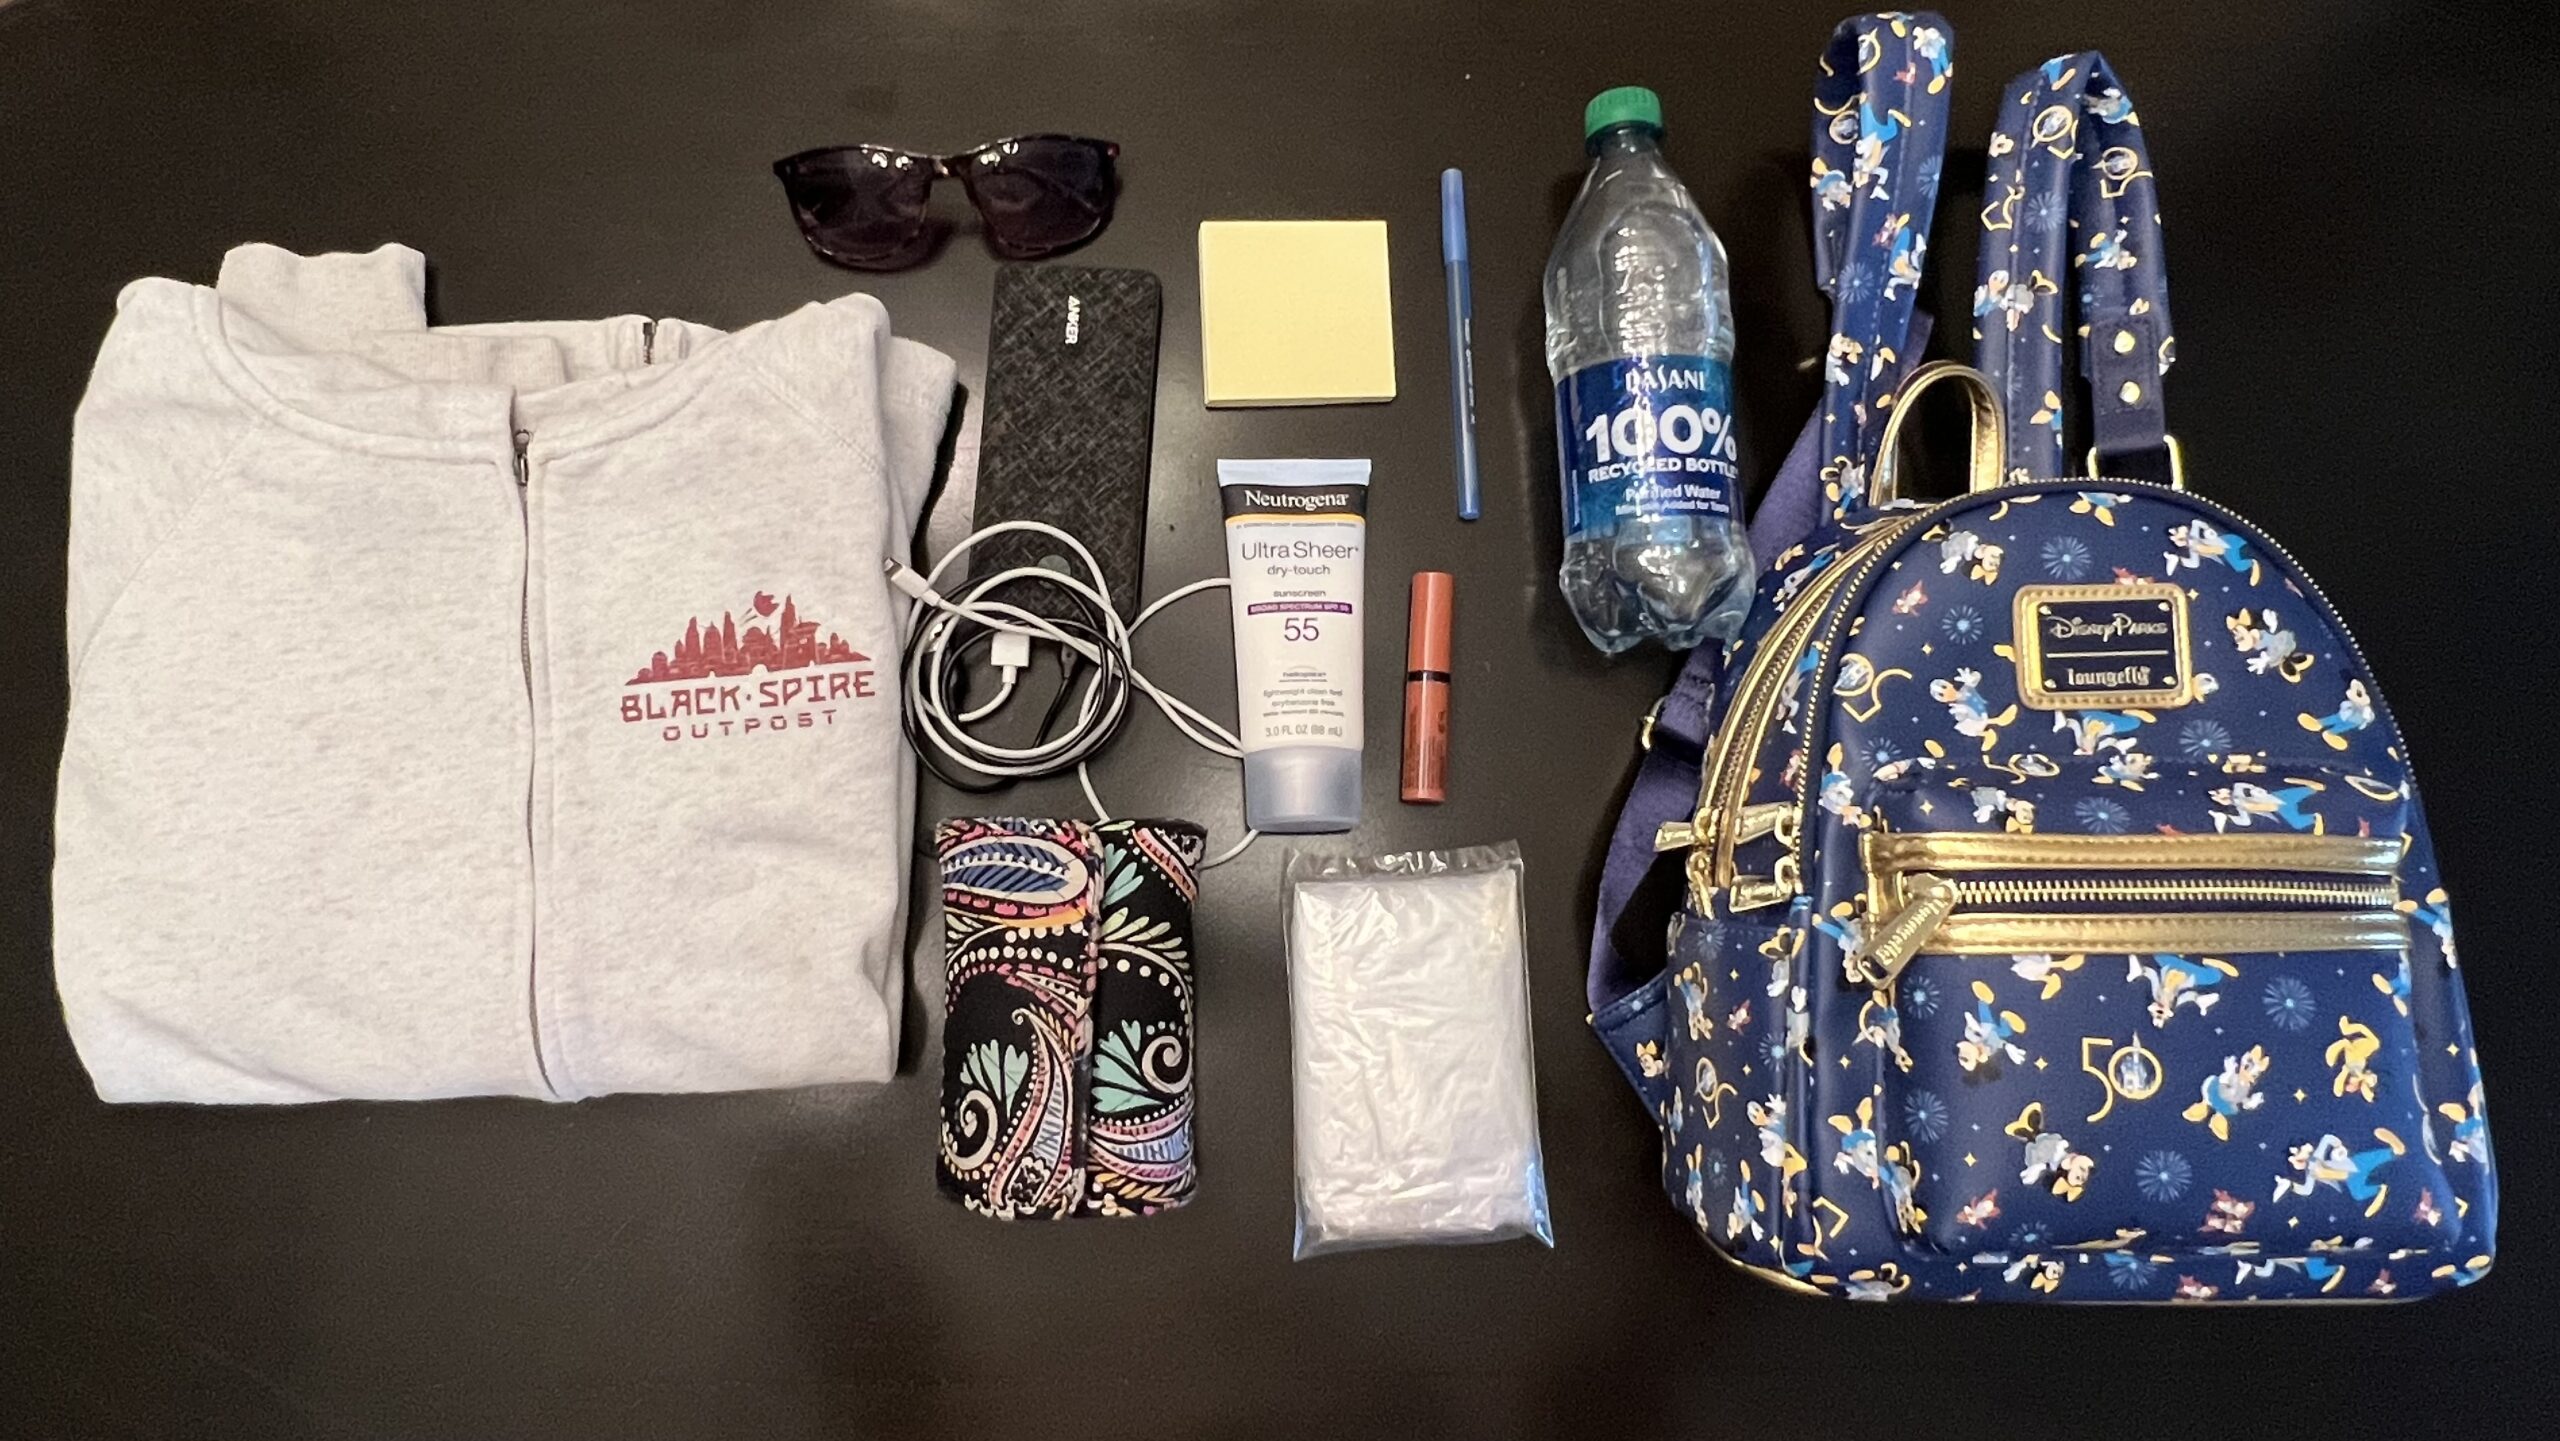 What's in my Disney Loungefly Backpack?